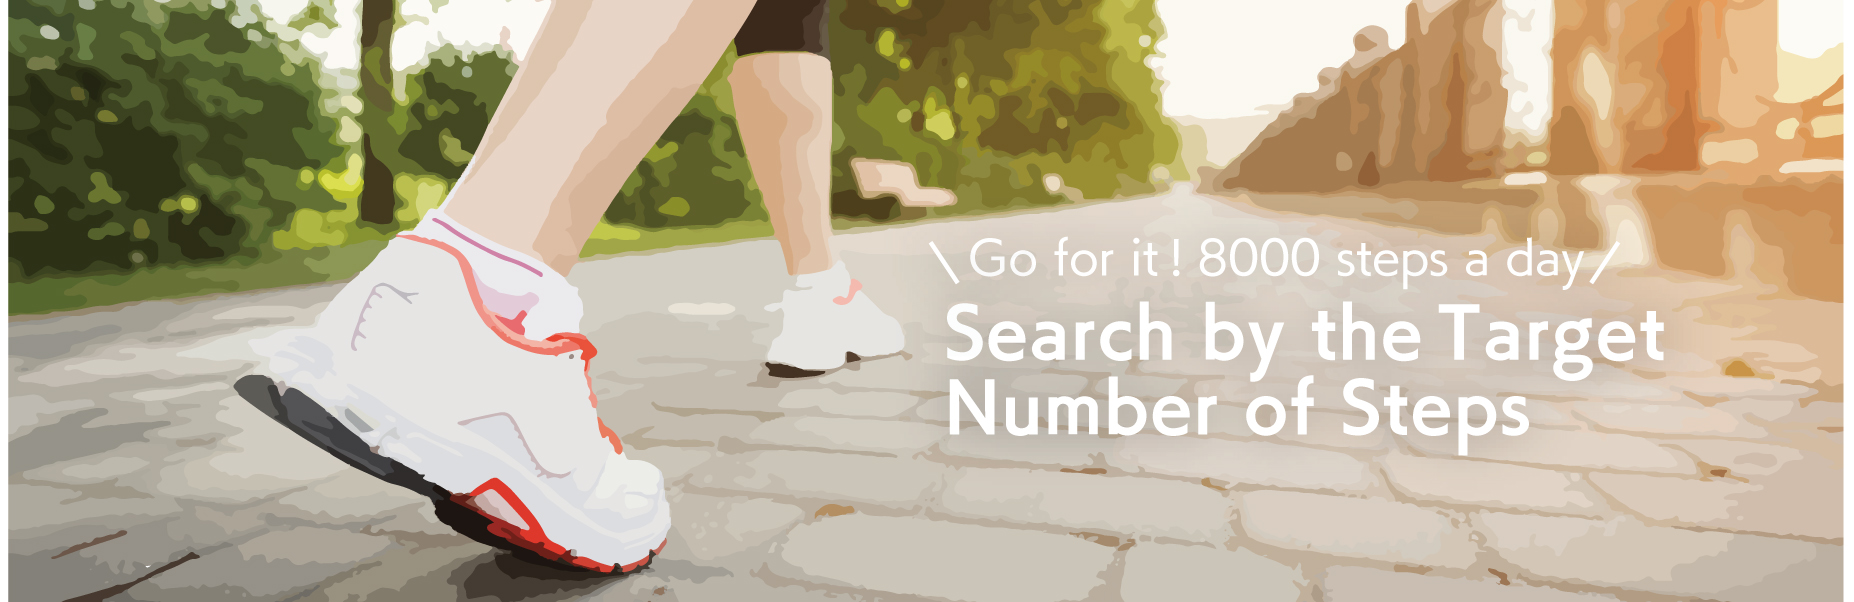 Search by the Target Number of Steps